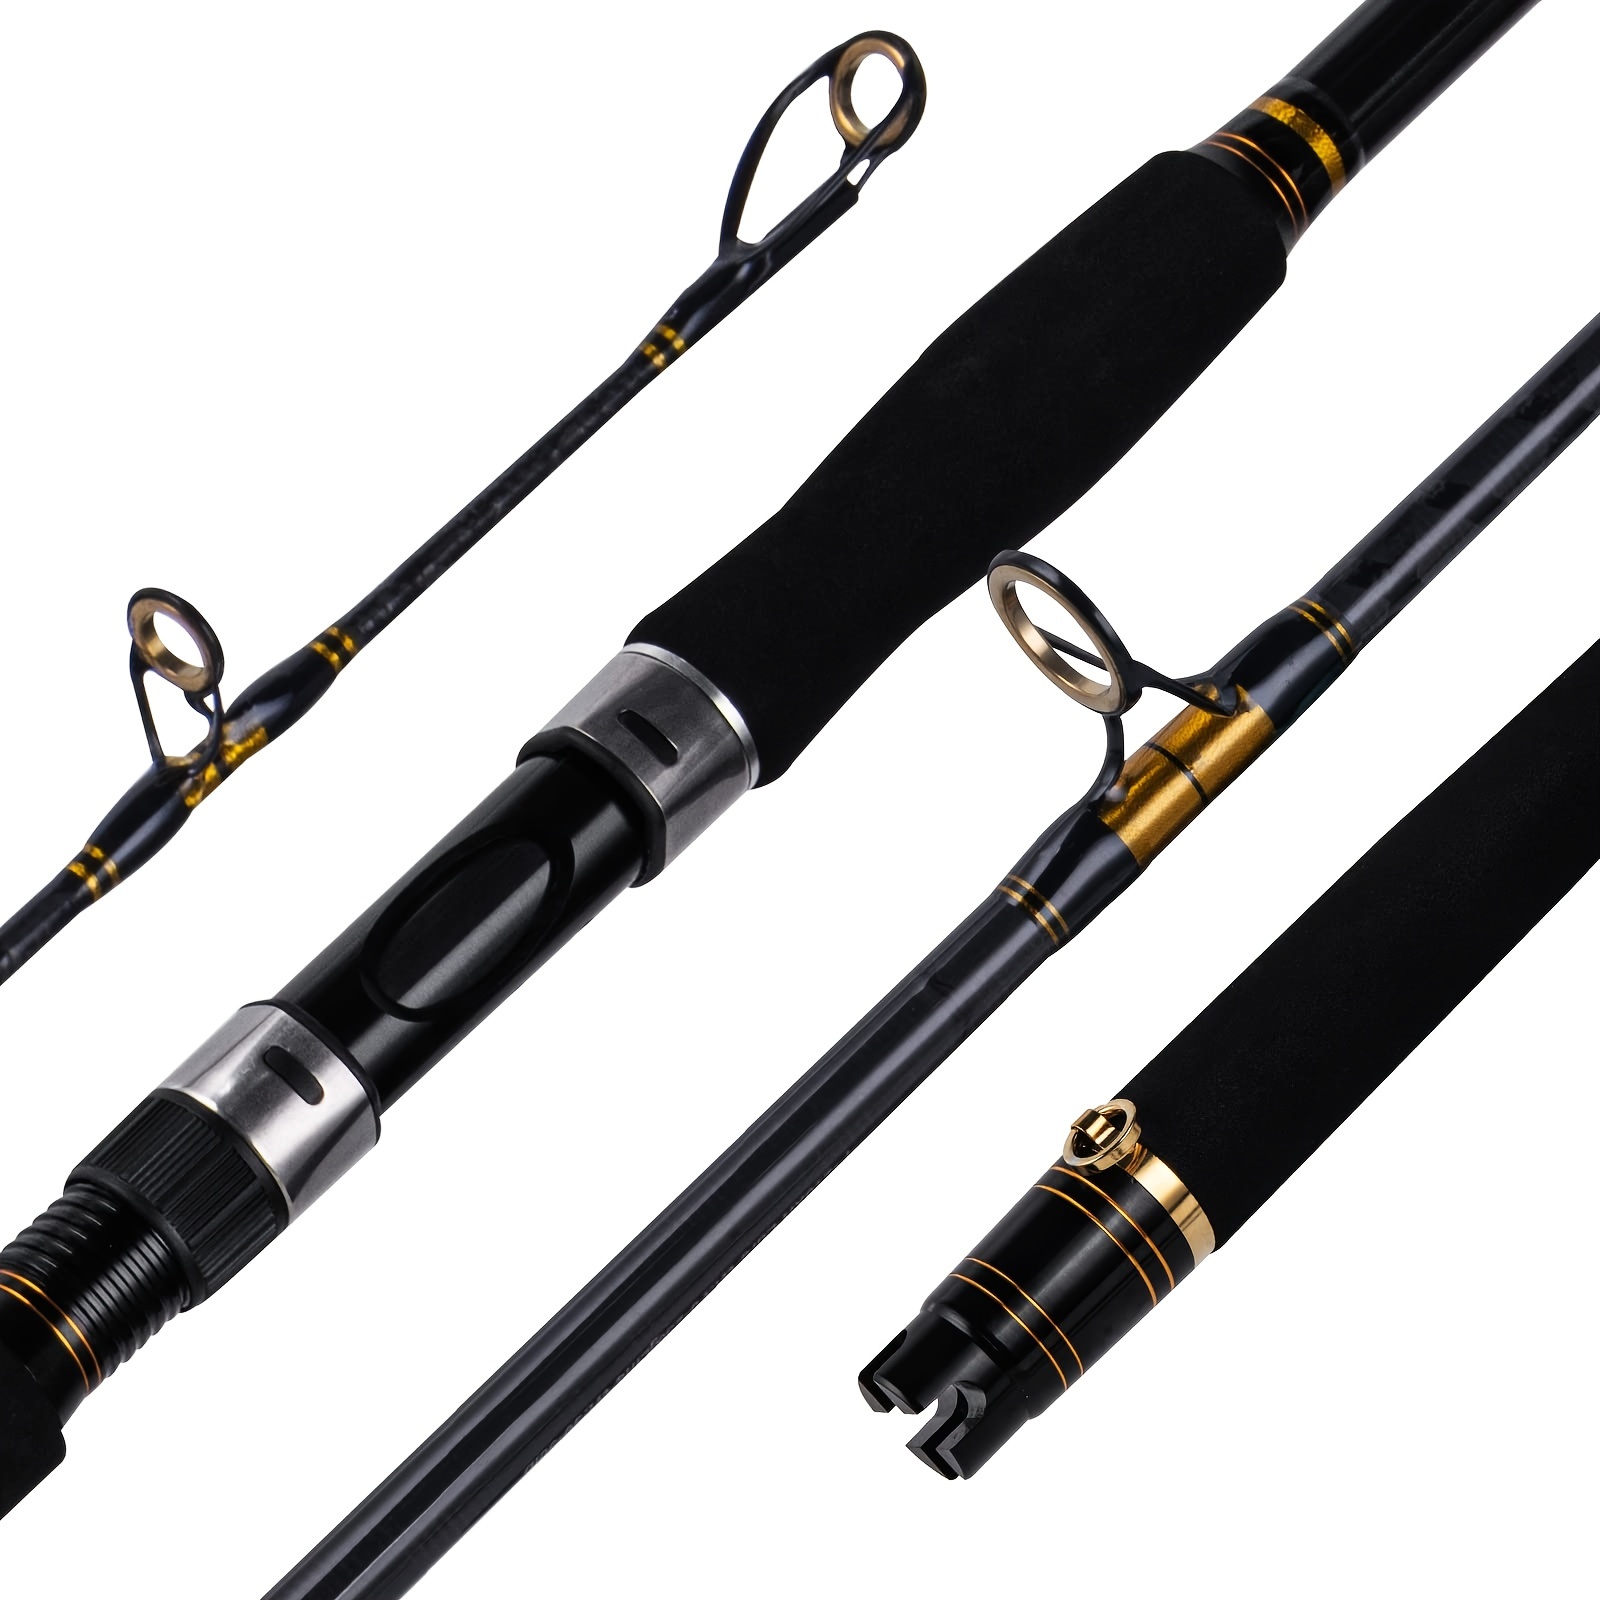 Goture Heavy Duty Spinning Fishing Rod With Anti winding - Temu